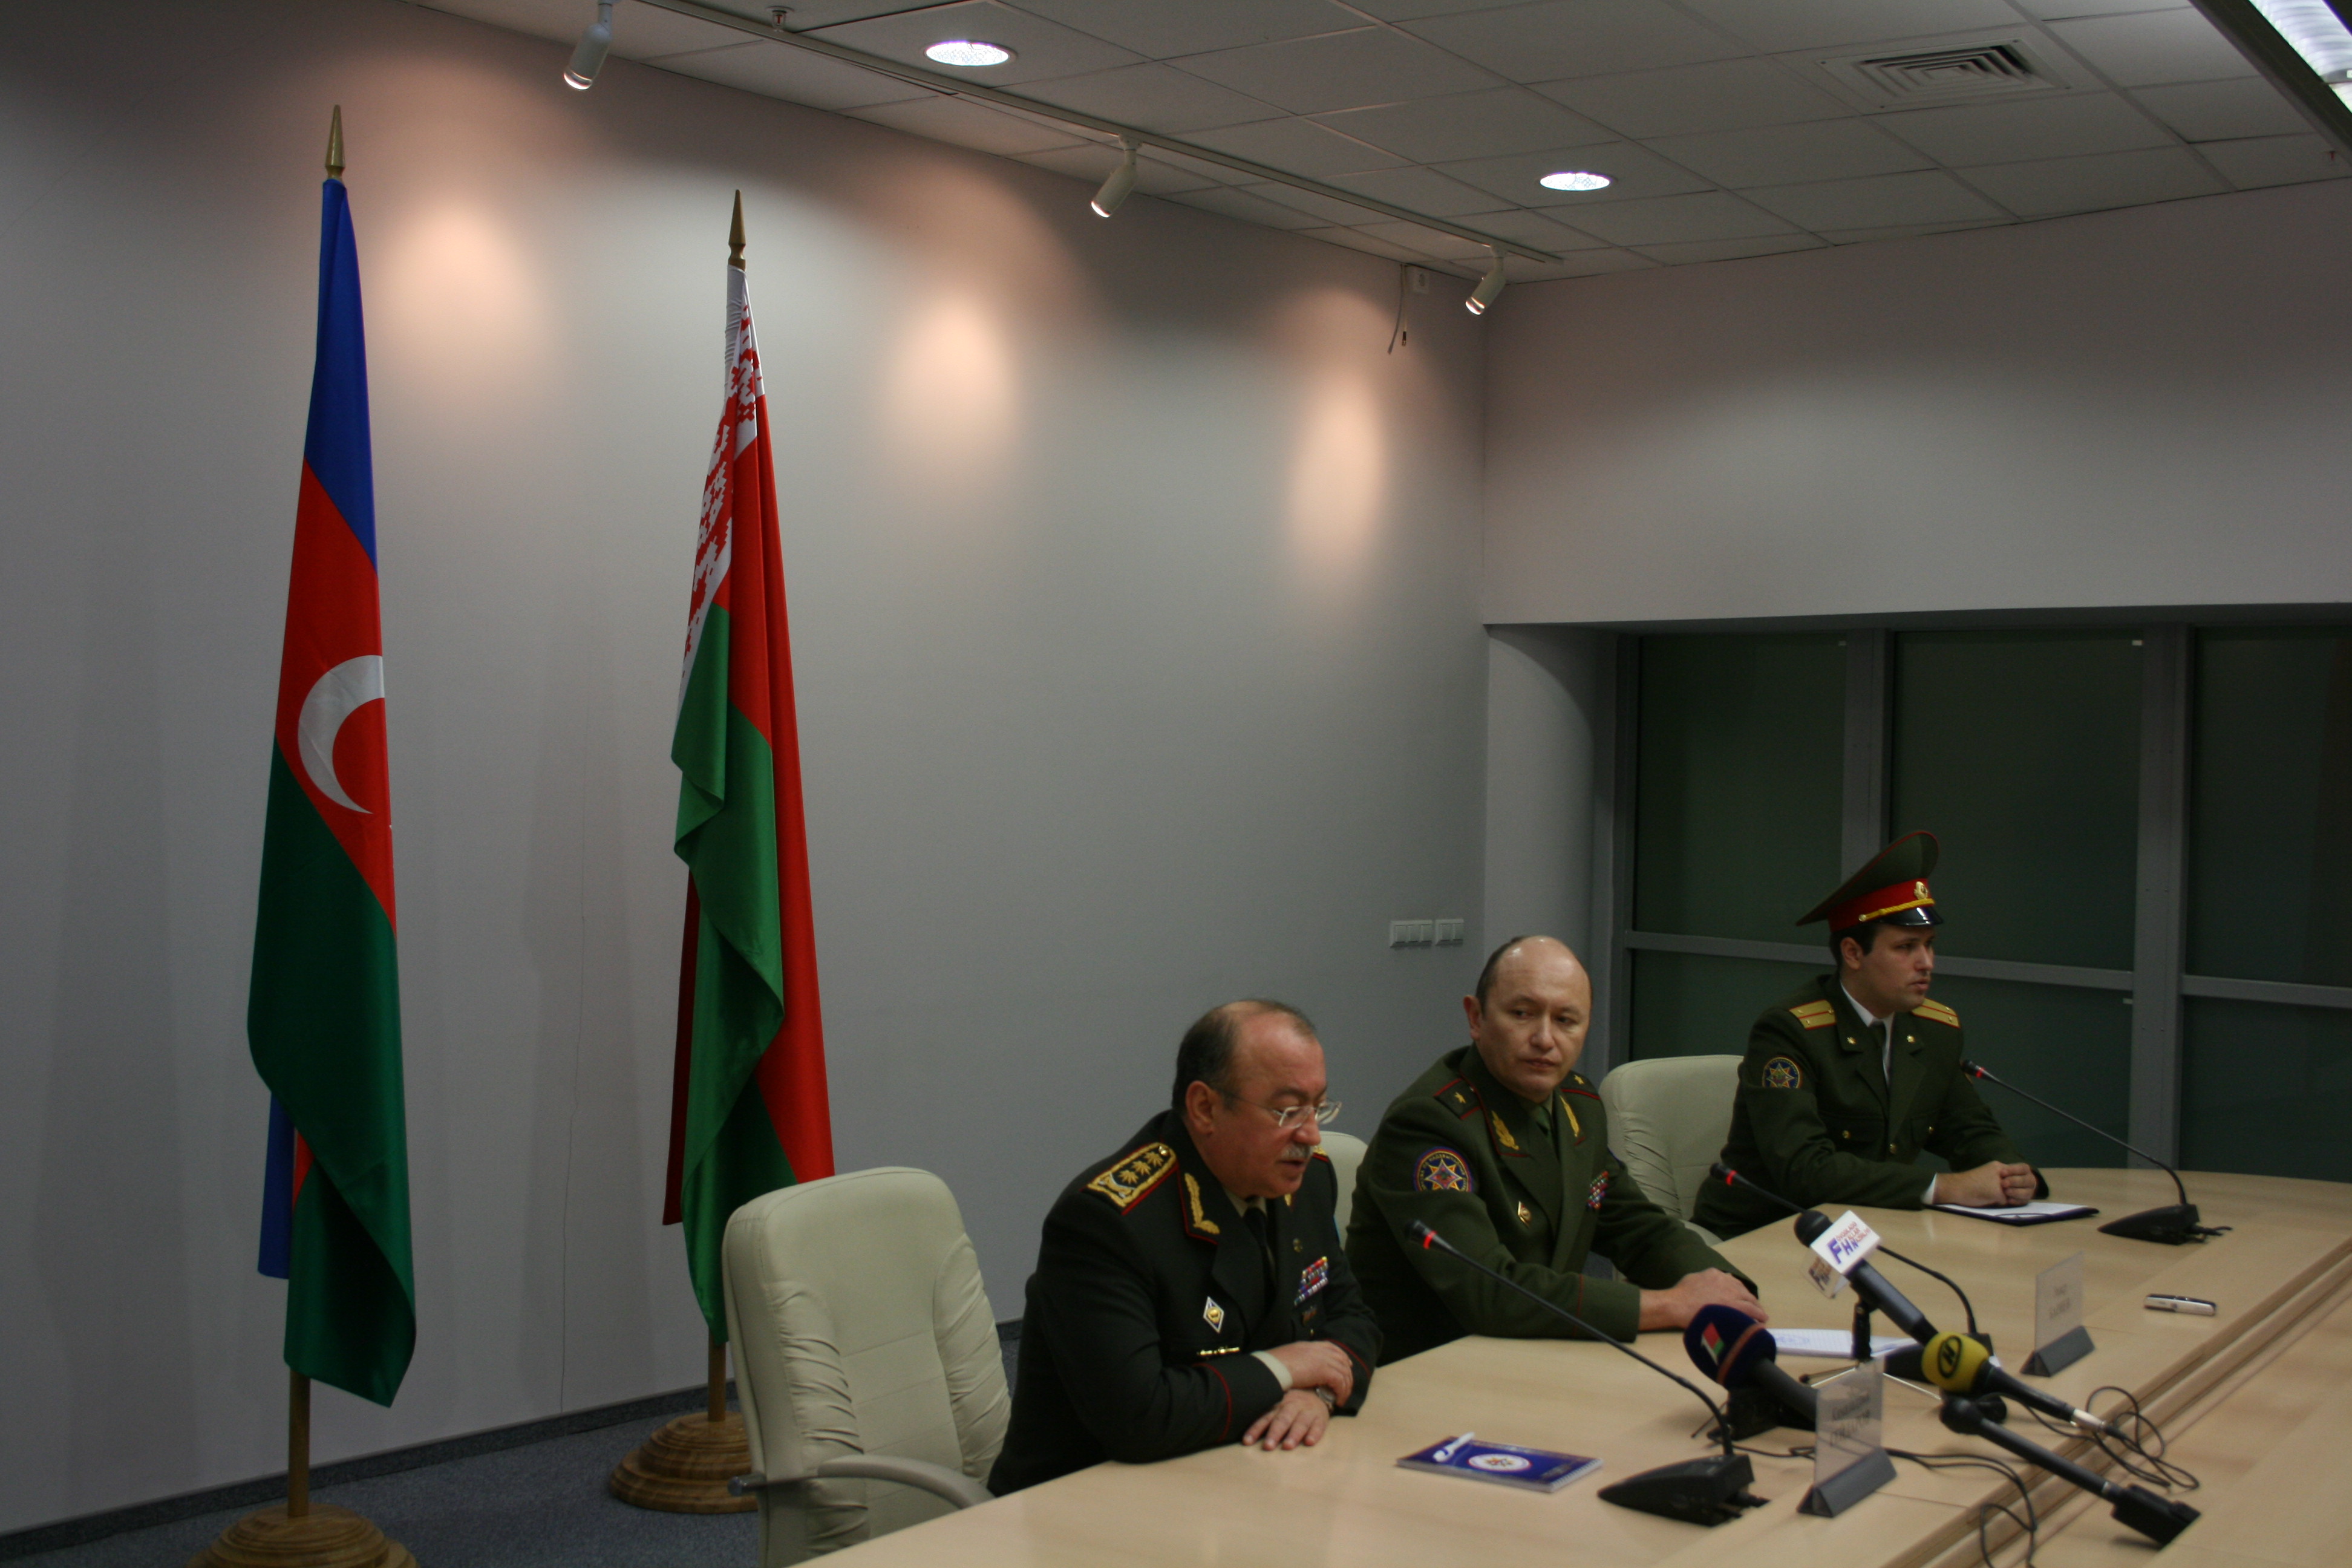 Press conference of Ministers of Emergency of Belarus and Azerbaijan